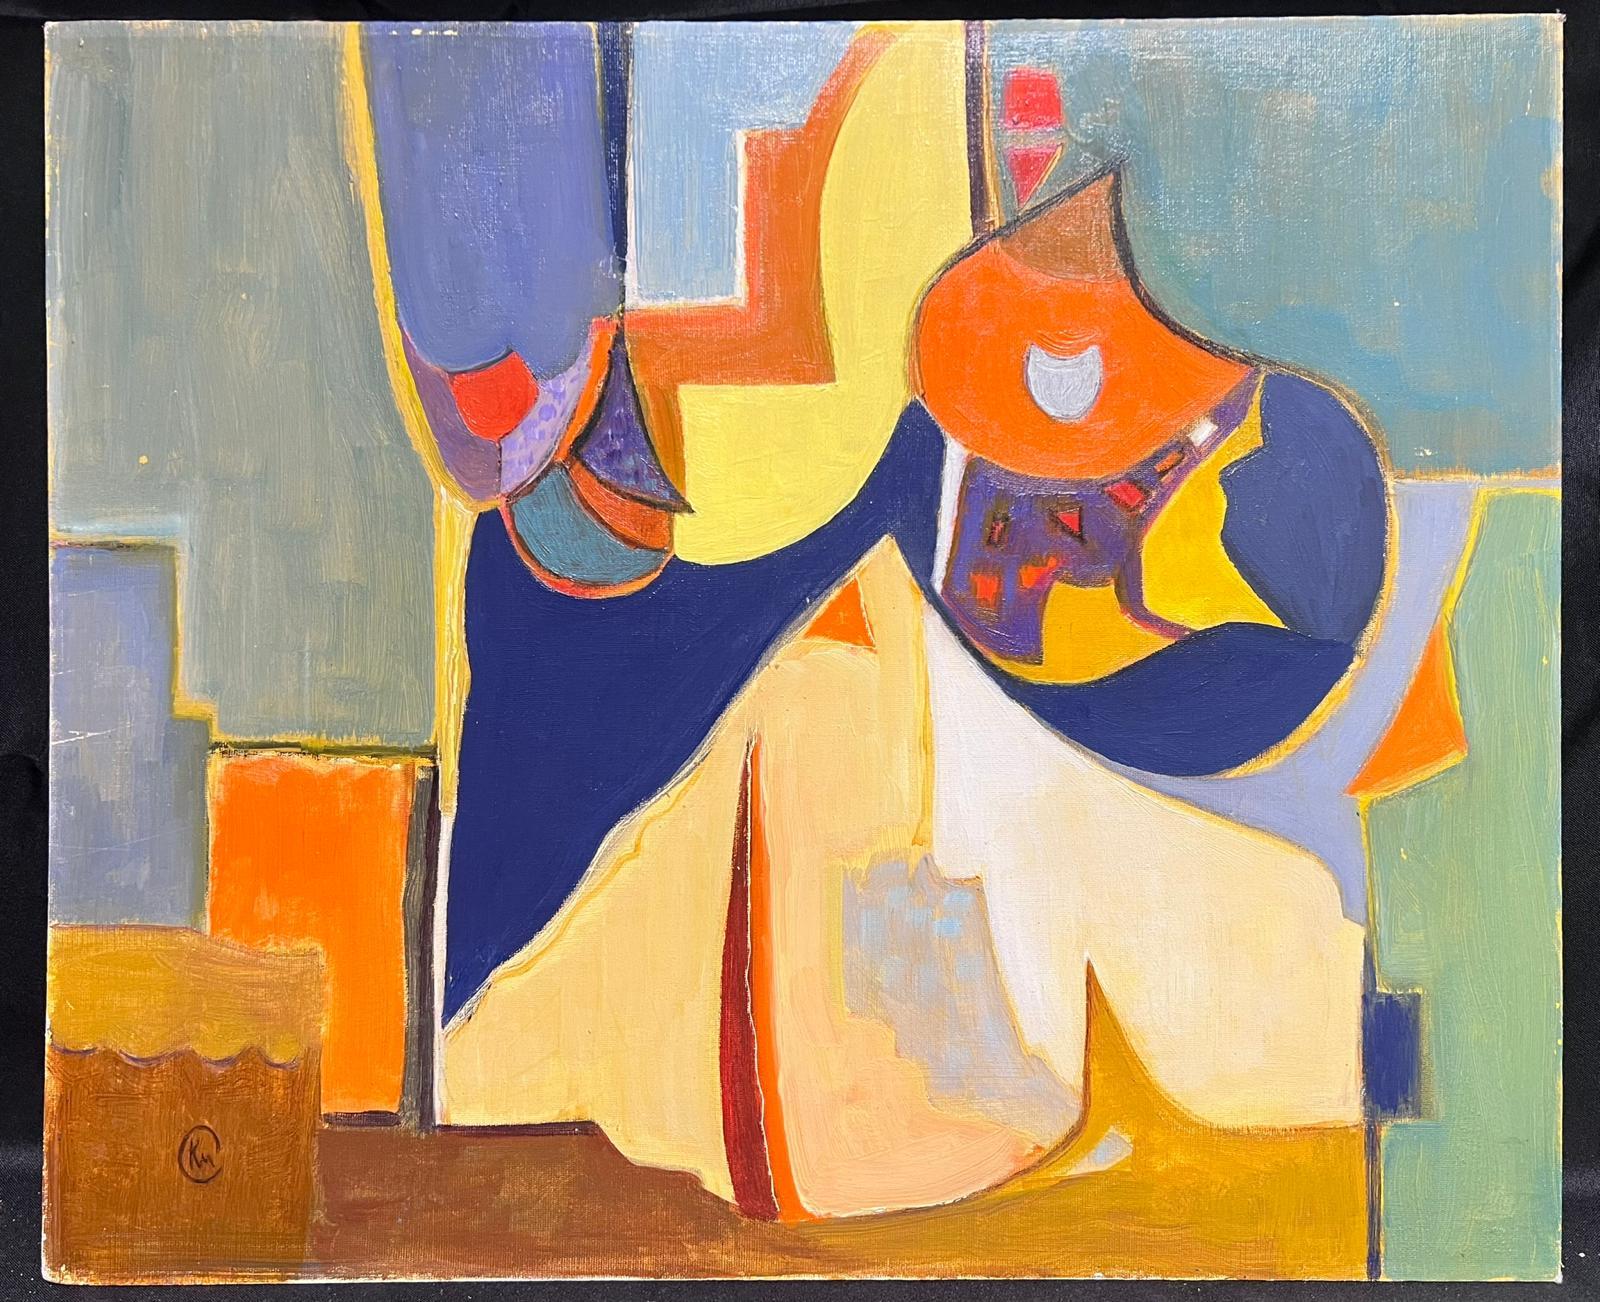 Artist/ School: Kathleen Crow, British contemporary

Title: Cubist composition

Medium: oil on board, unframed 

Board: 20 x 24 inches

Provenance: private collection, England

Condition: The painting is in overall very good and sound condition.
 